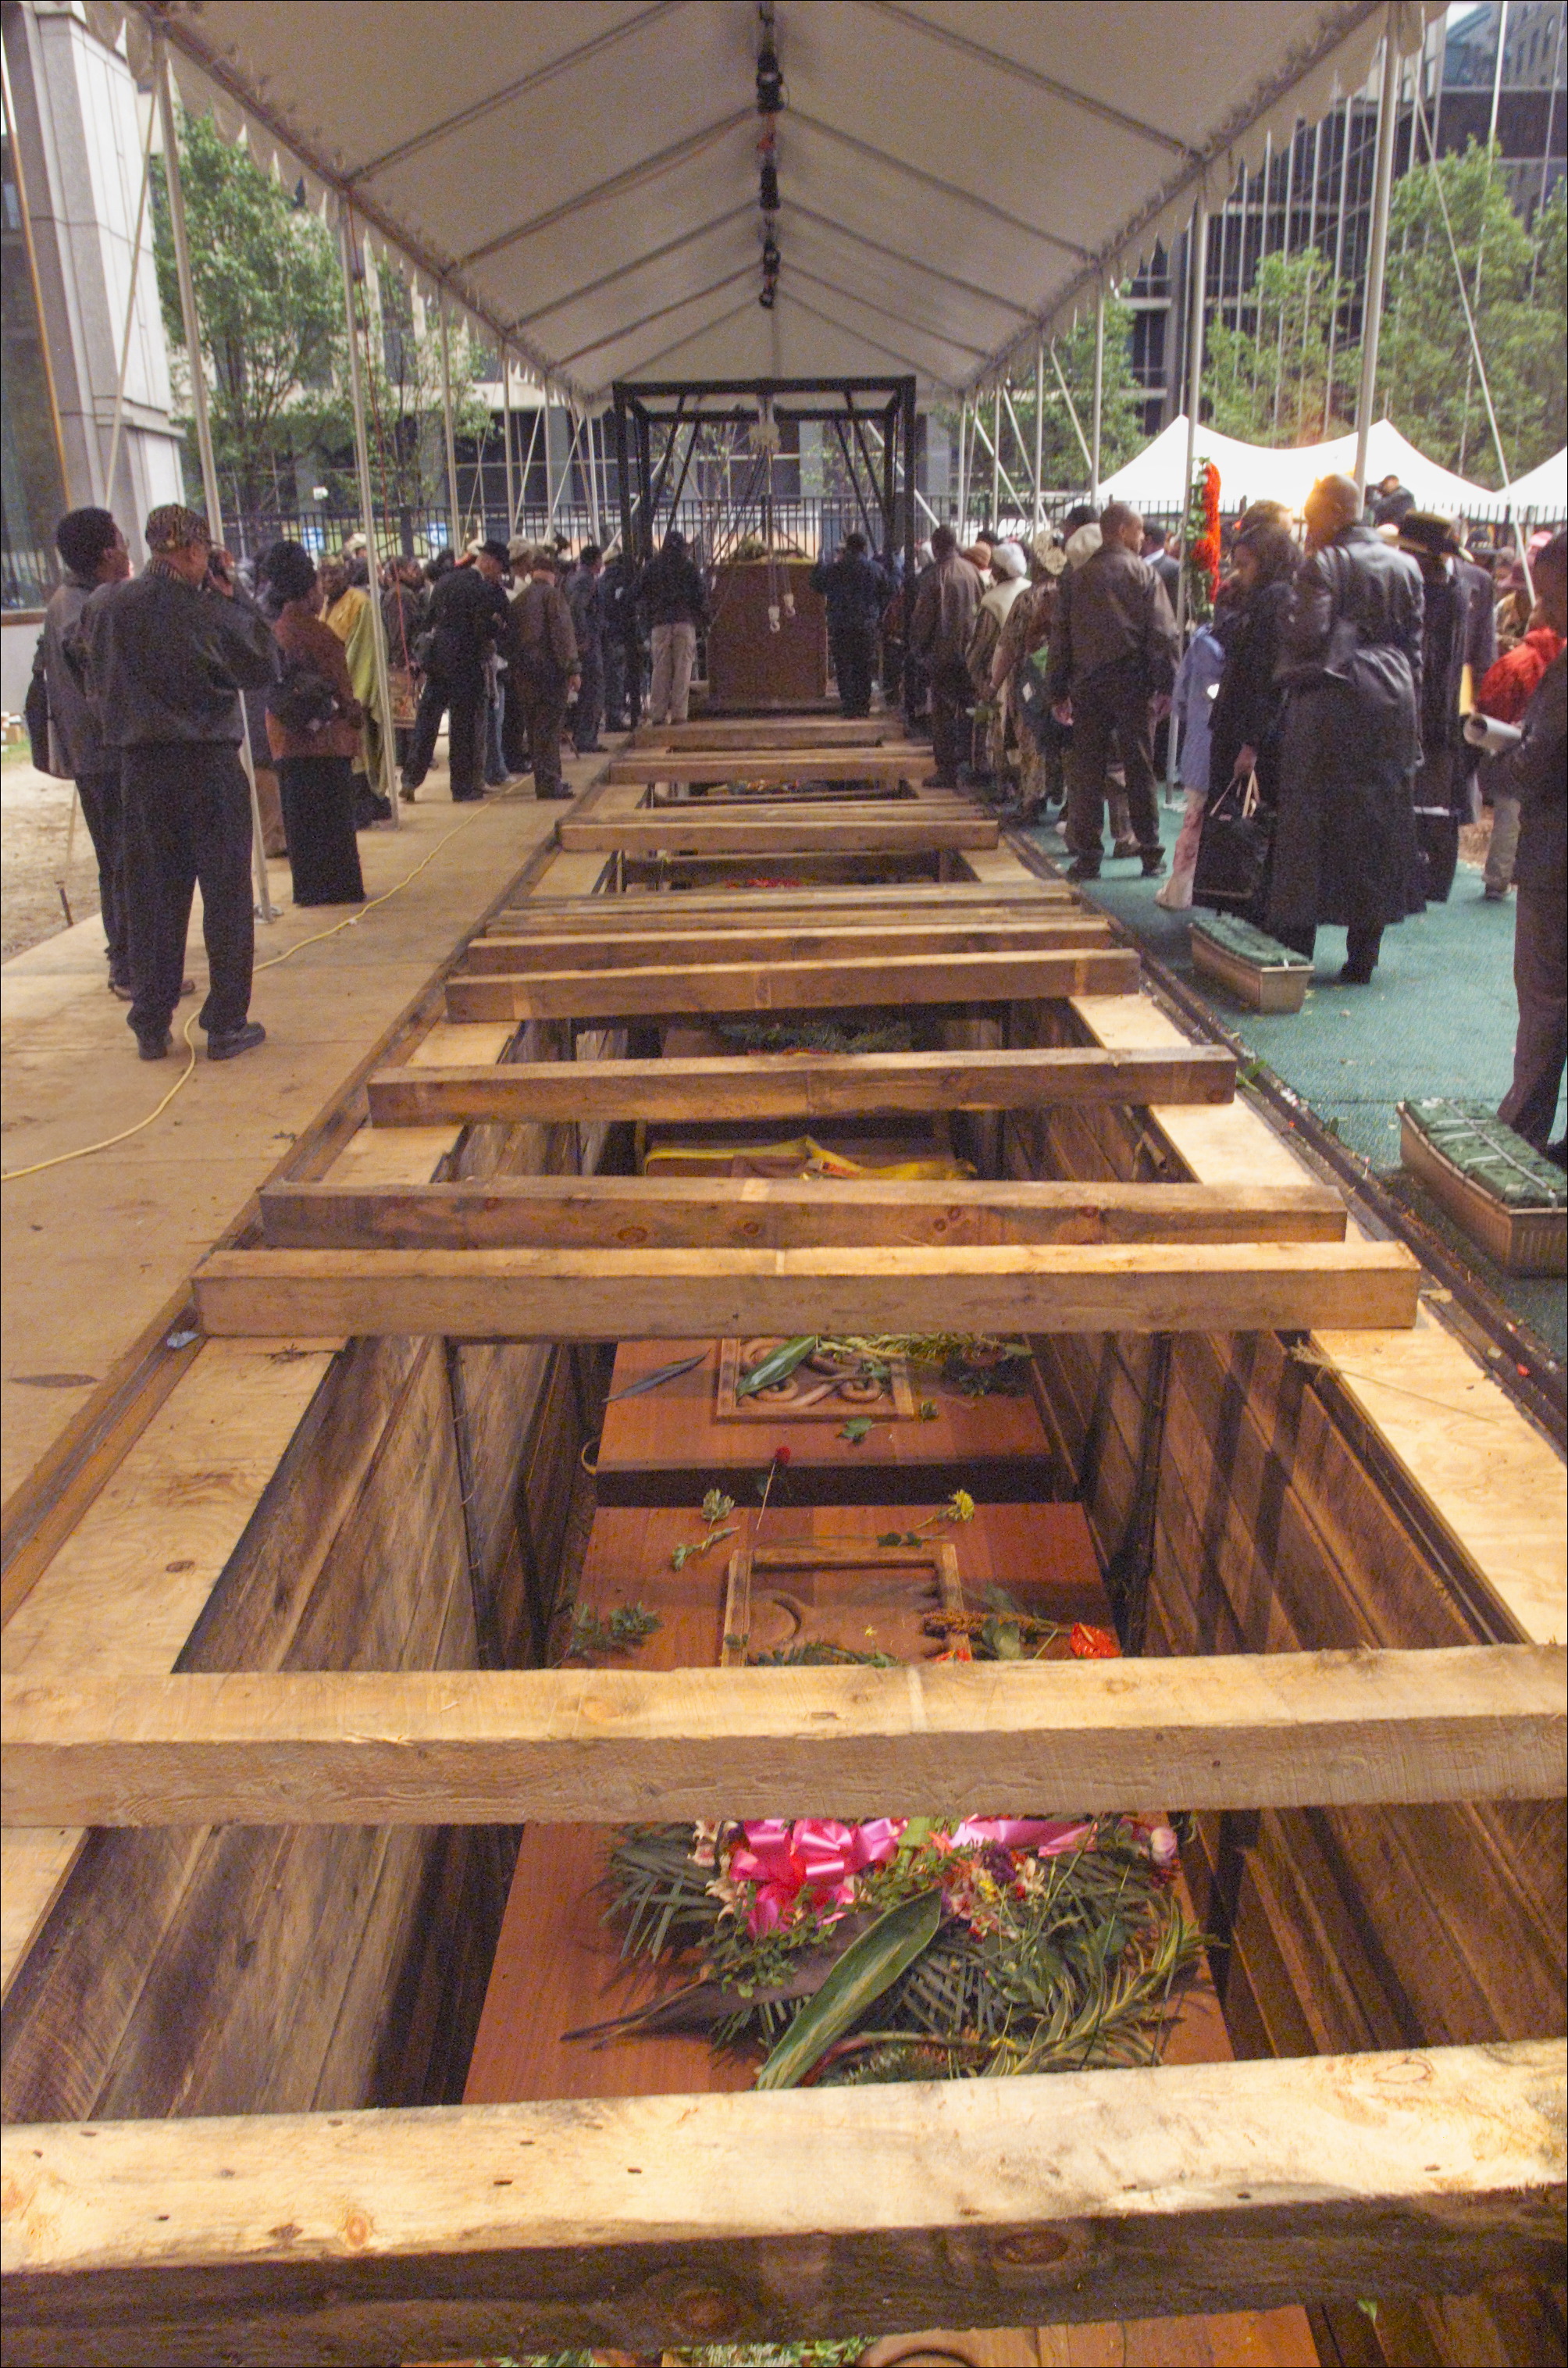 Vaults being lowered to into ground for the African Burial Ground Project